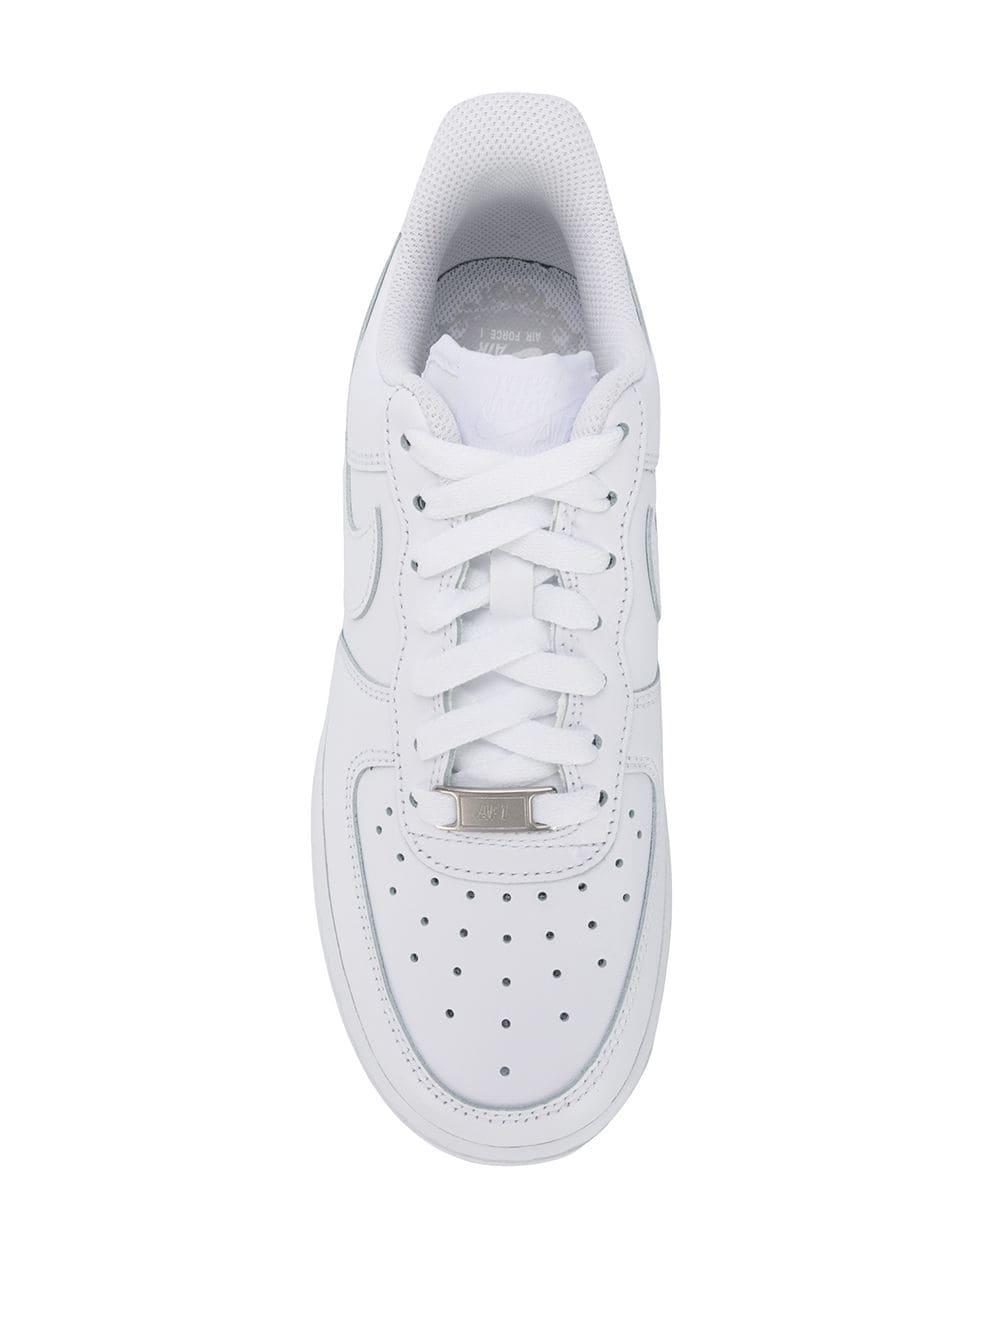 Nike Air Force One Sneakers in White - Lyst